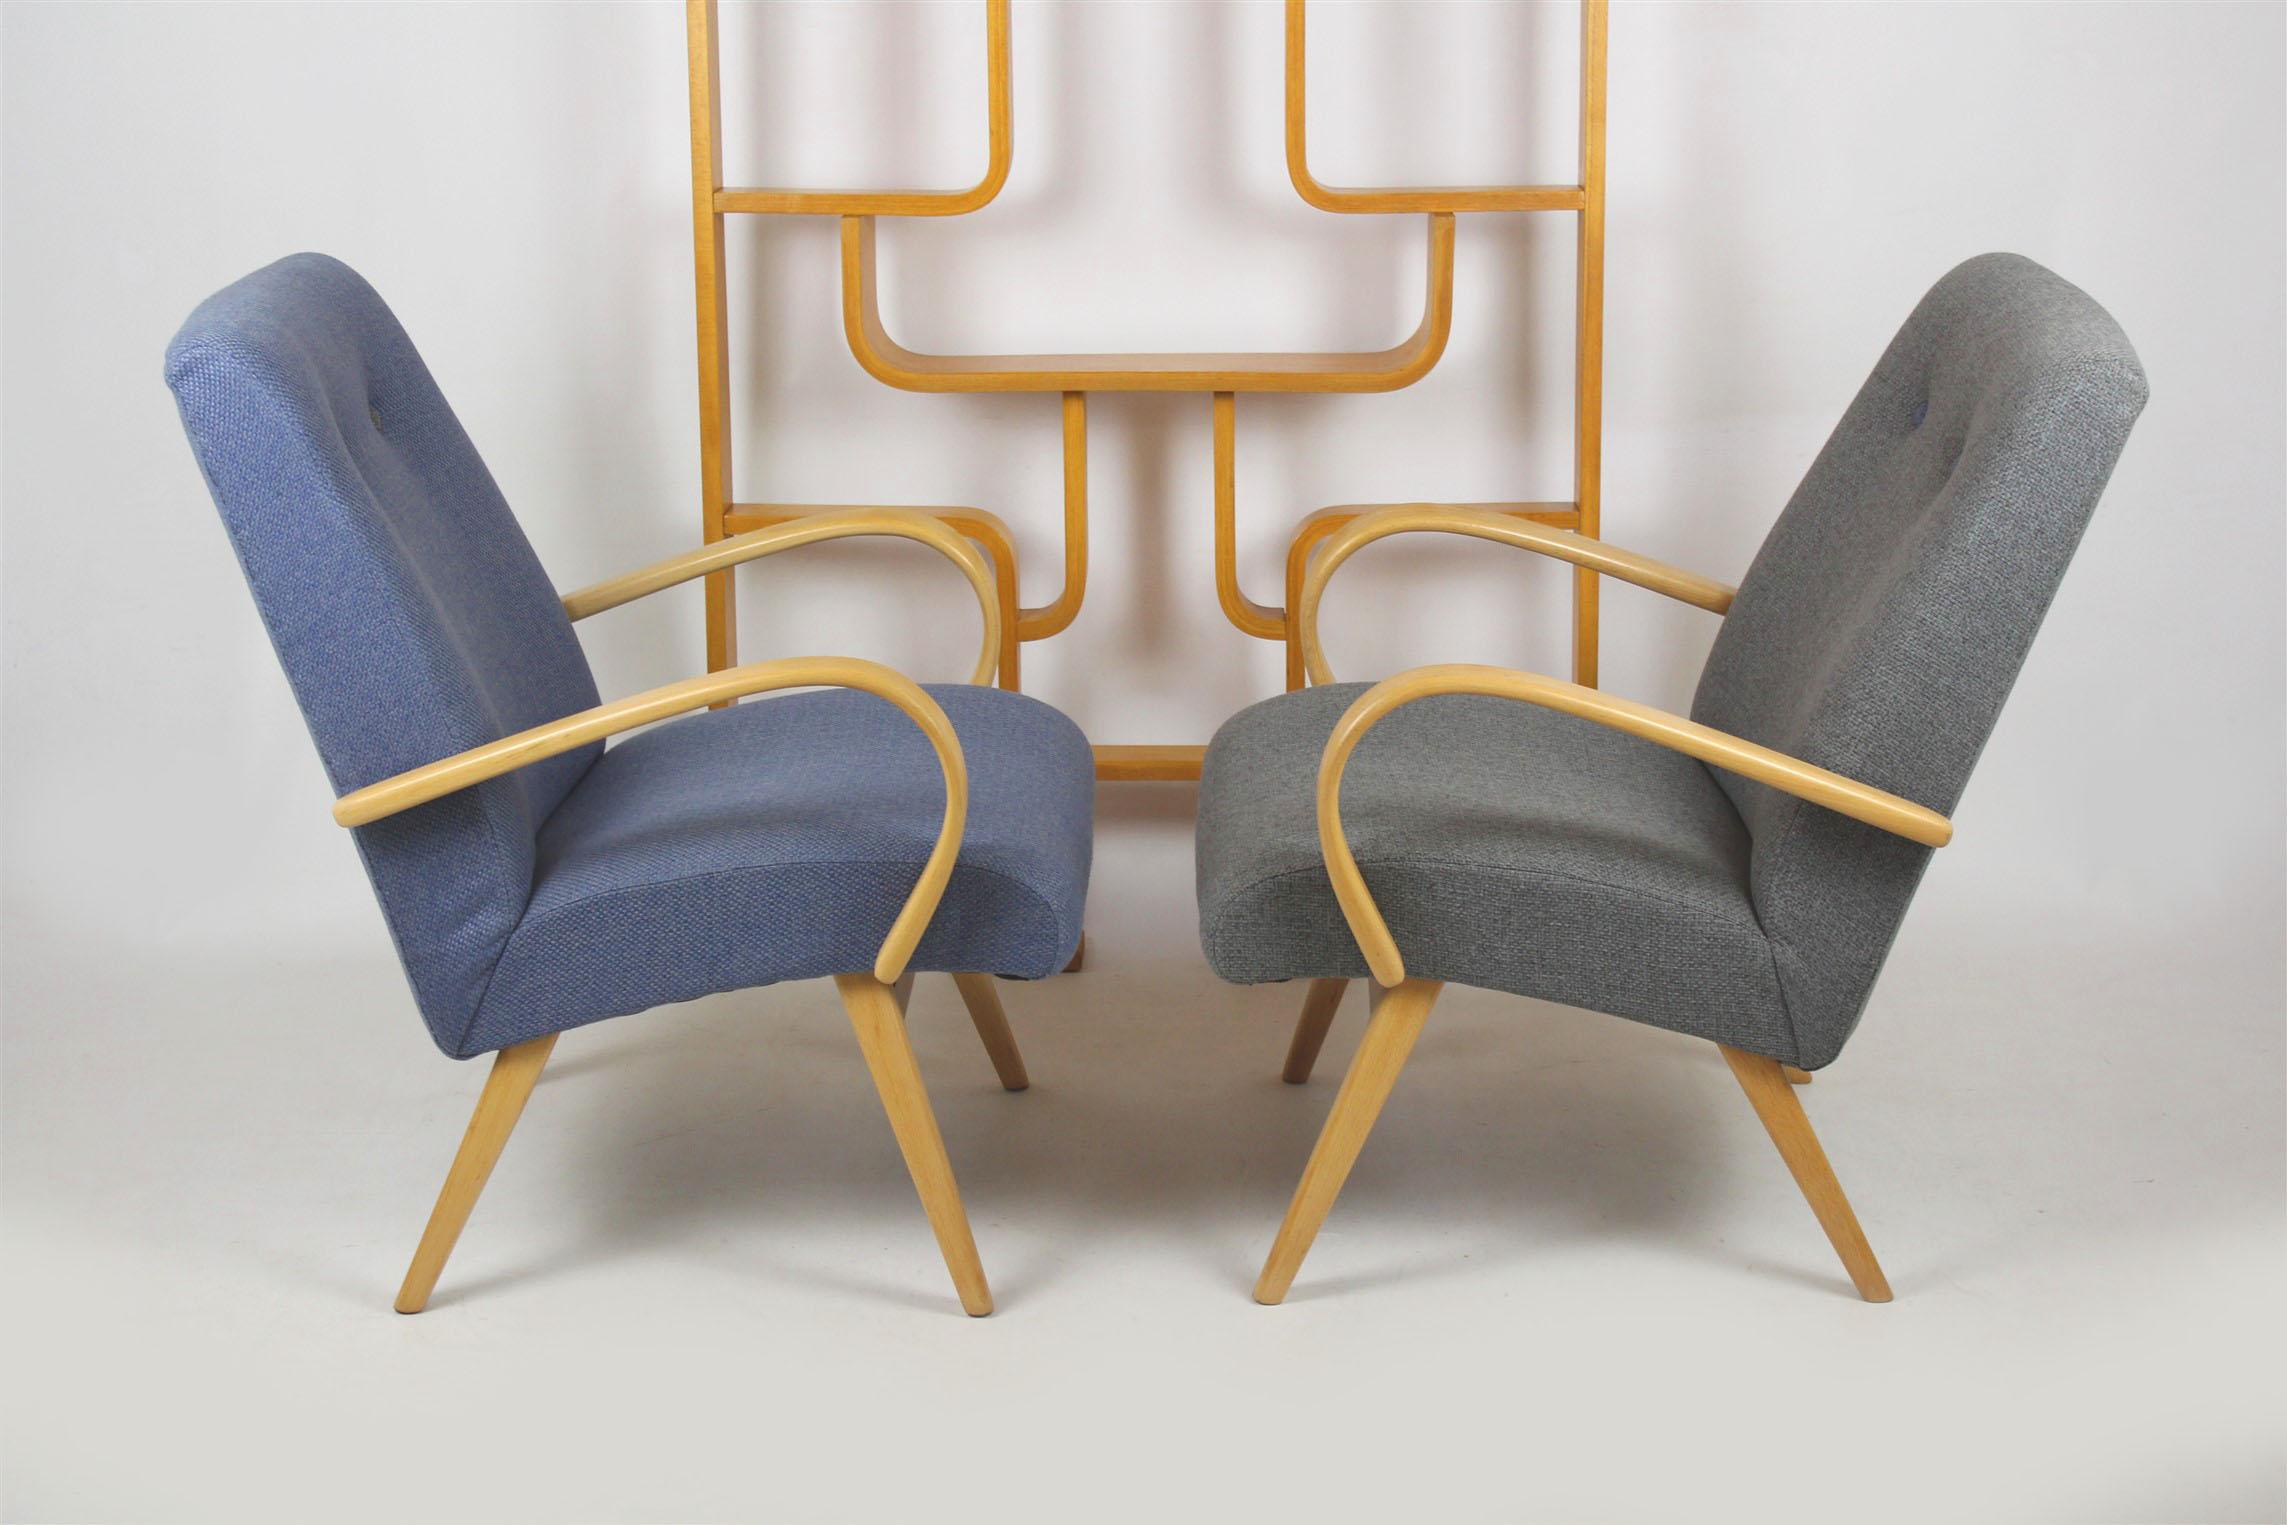 A pair of armchairs from the mid-1960s, made in former Czechoslovakia. Armrests made out of beech bentwood.
Chairs are fully restored (upholstered in fabric, satin lacquered woodwork).